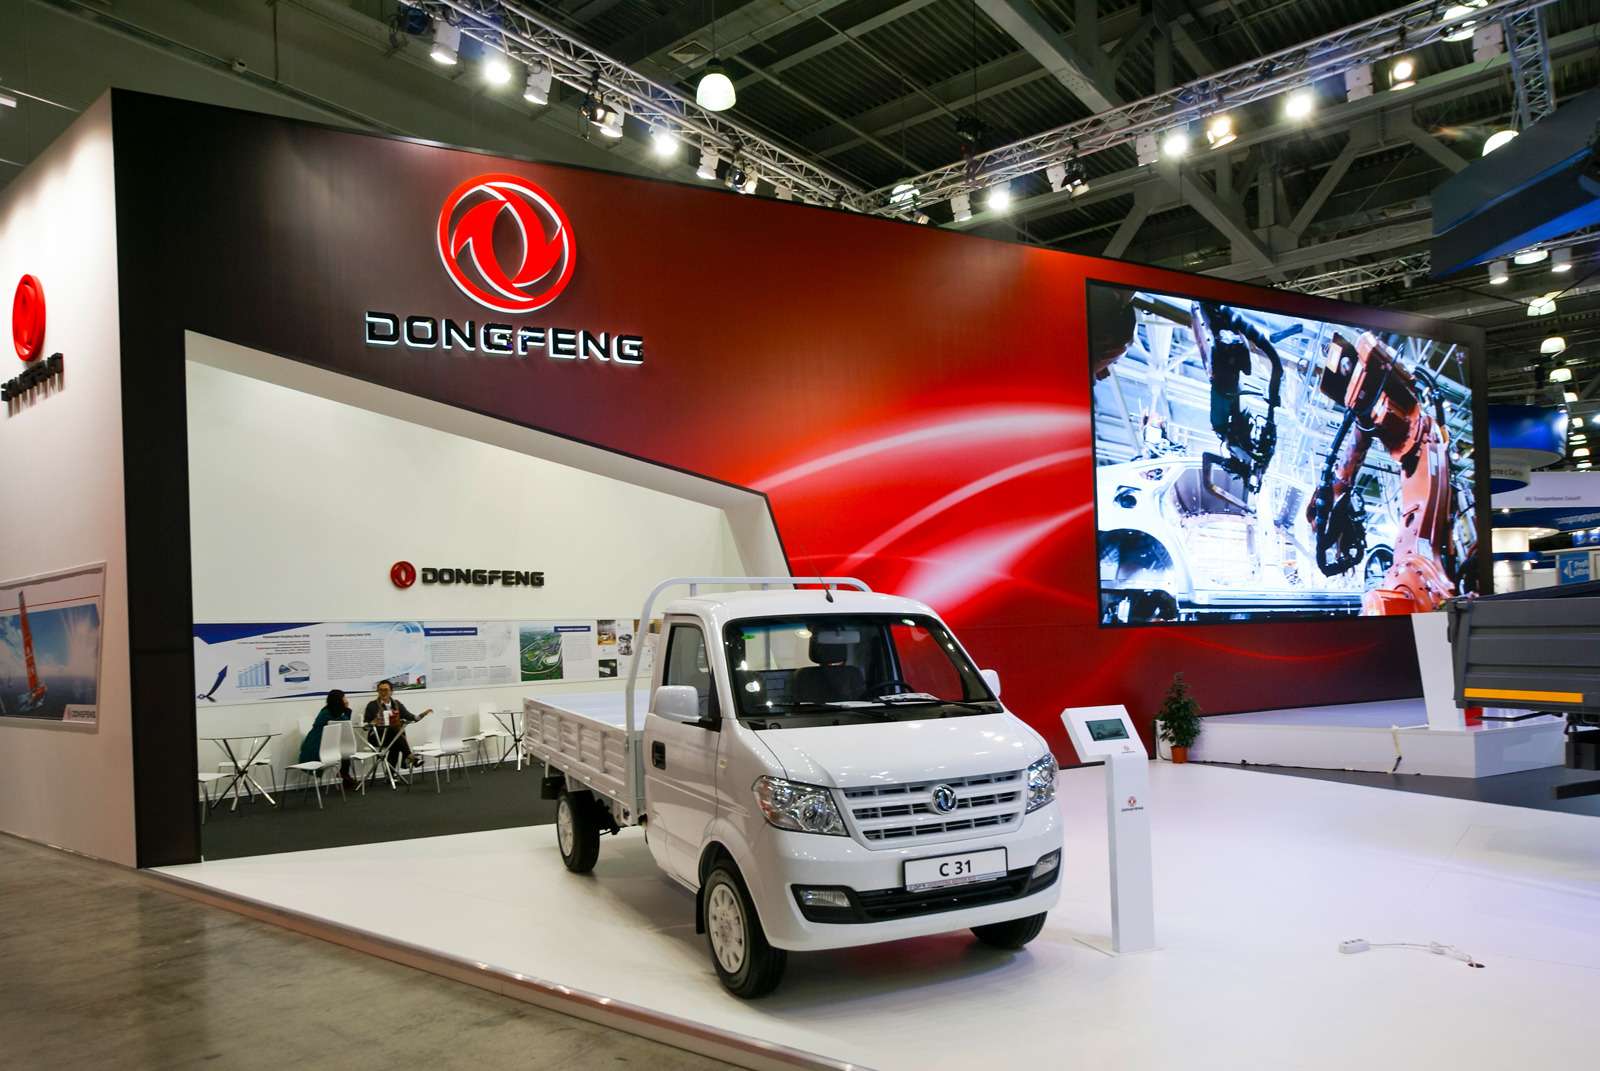 Dongfeng С31